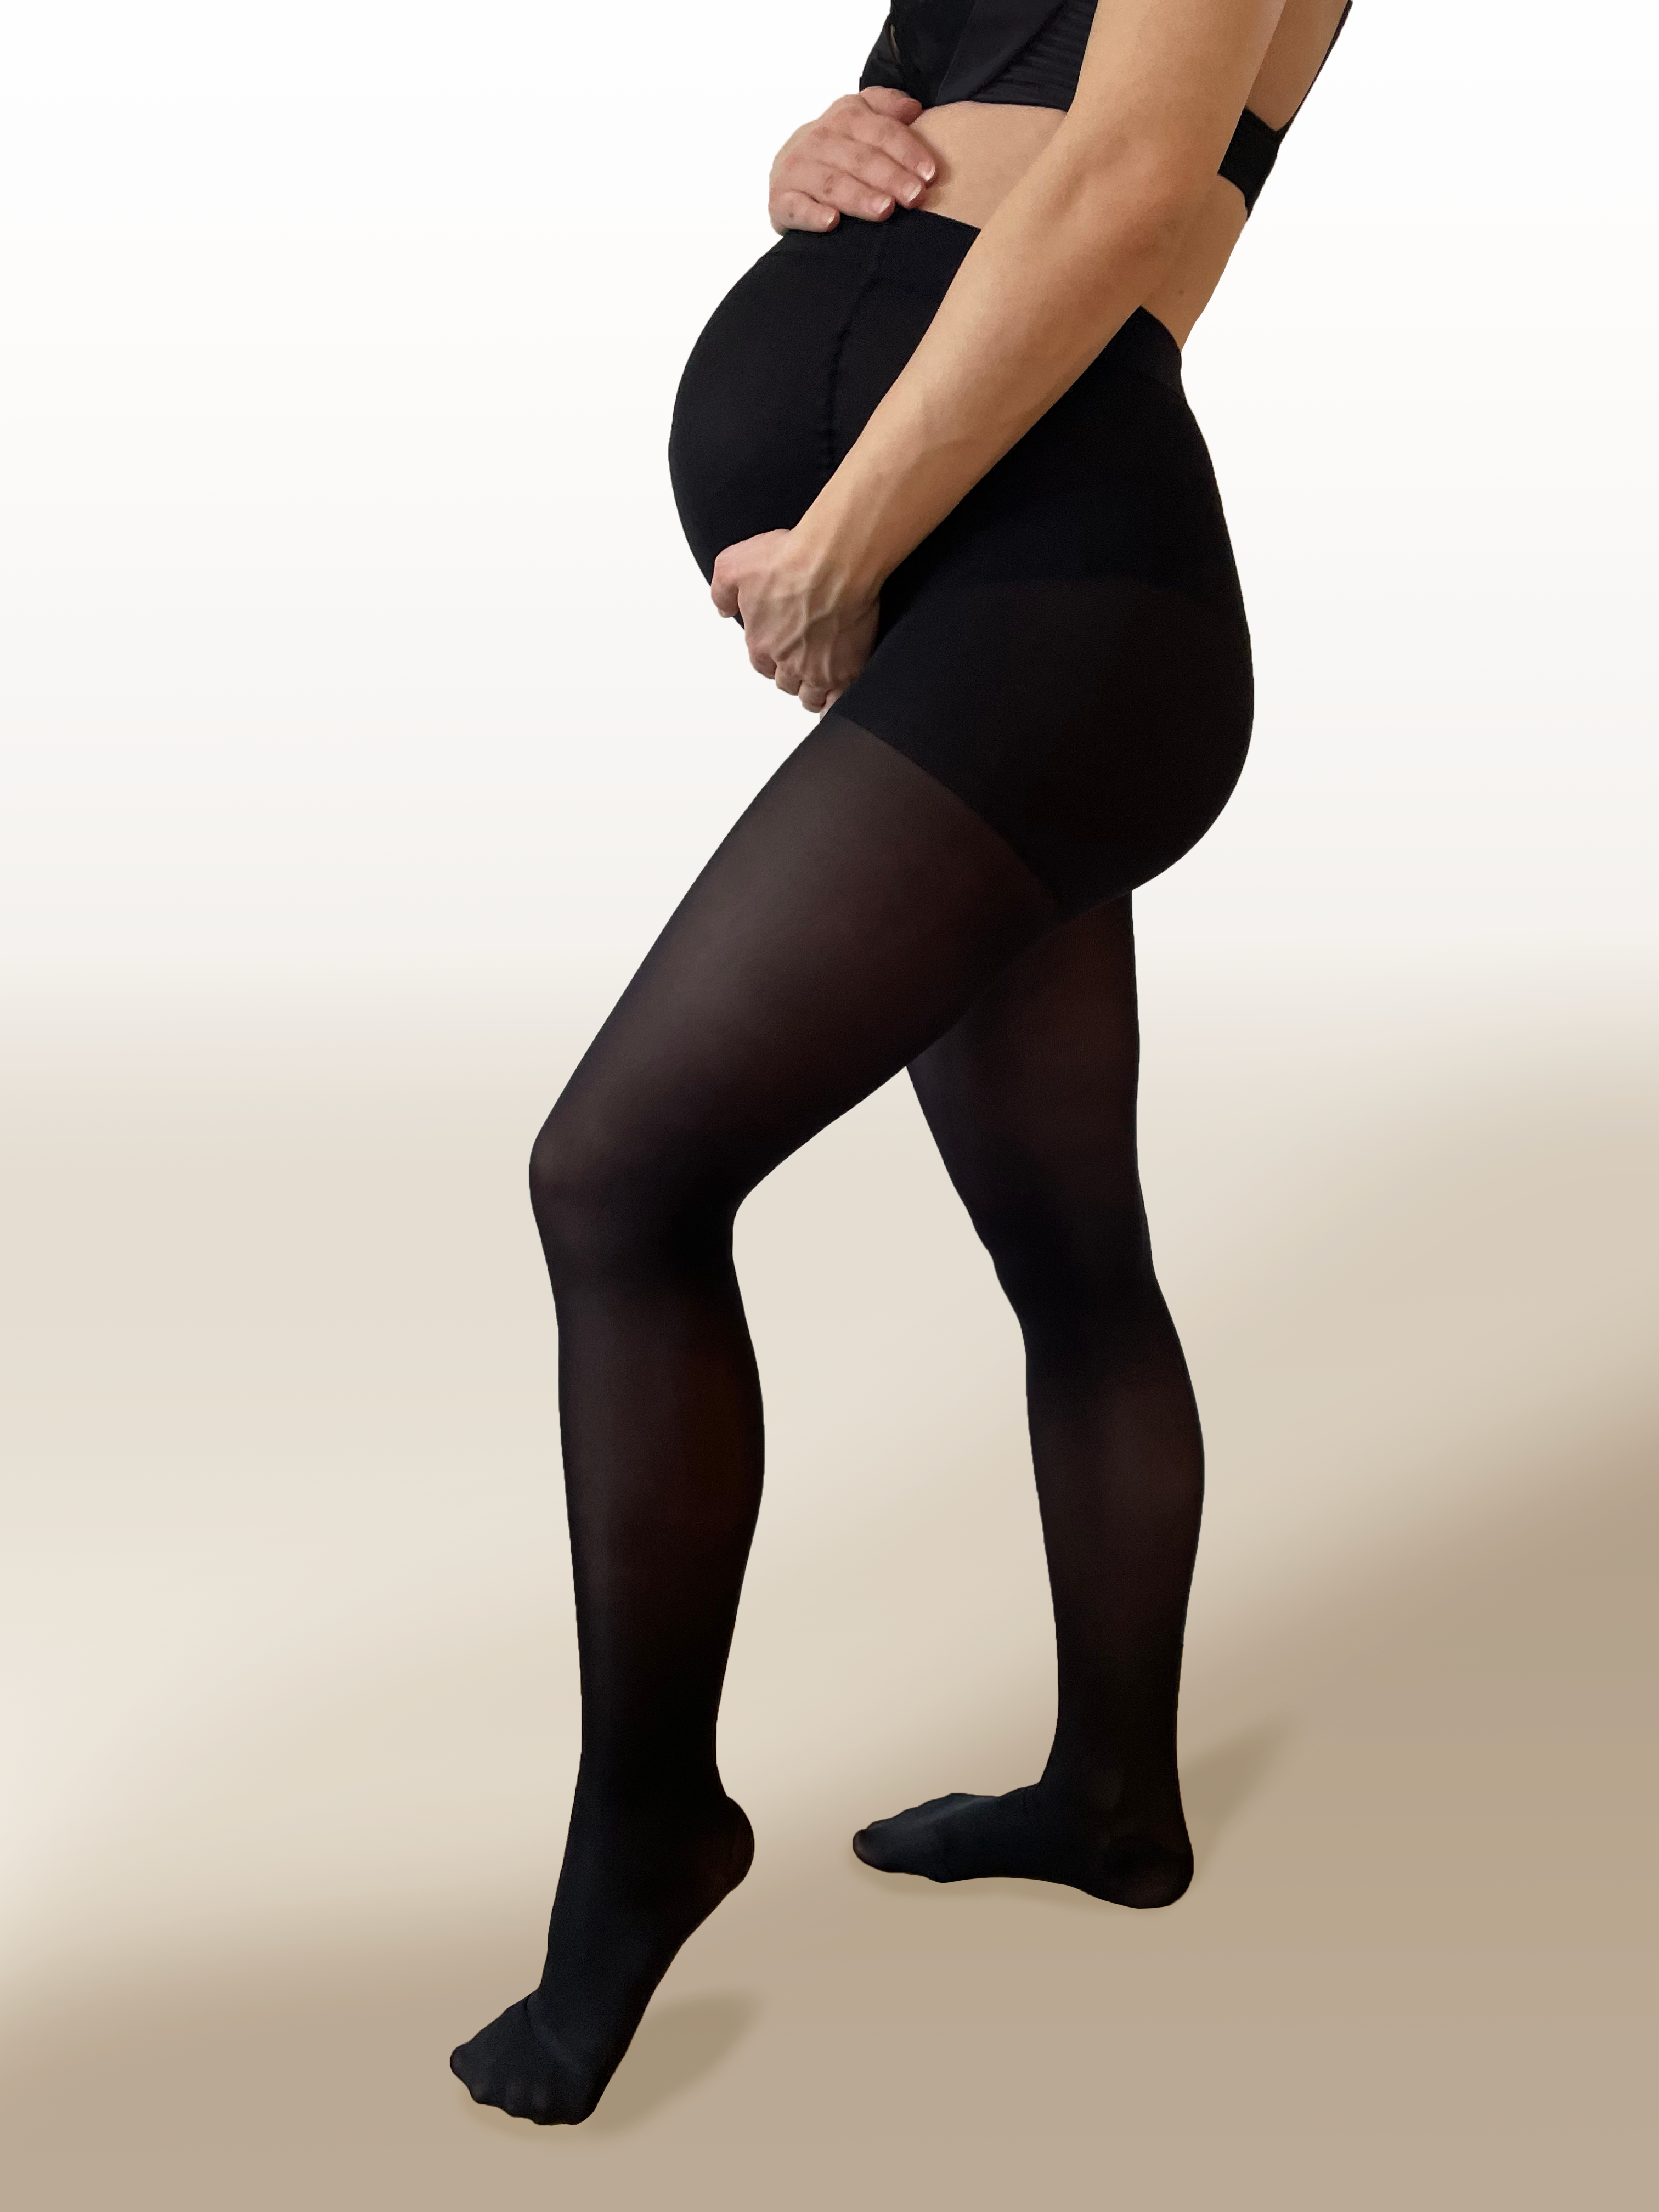 What Exactly IS Maternity Compression?